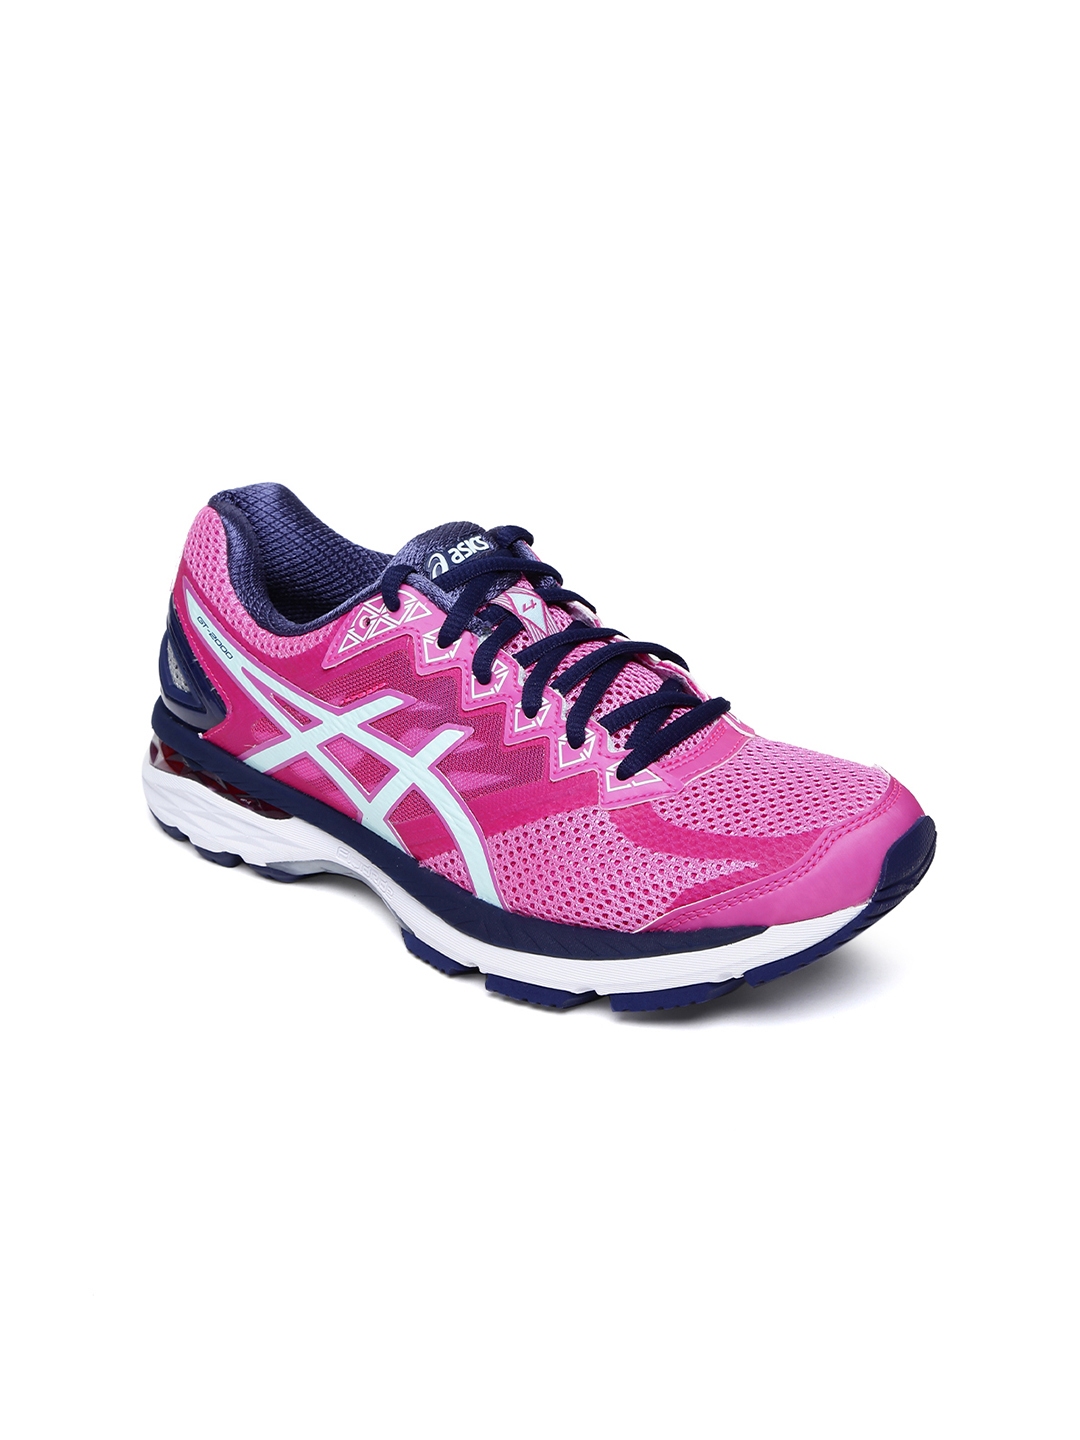 asics shoes womens pink